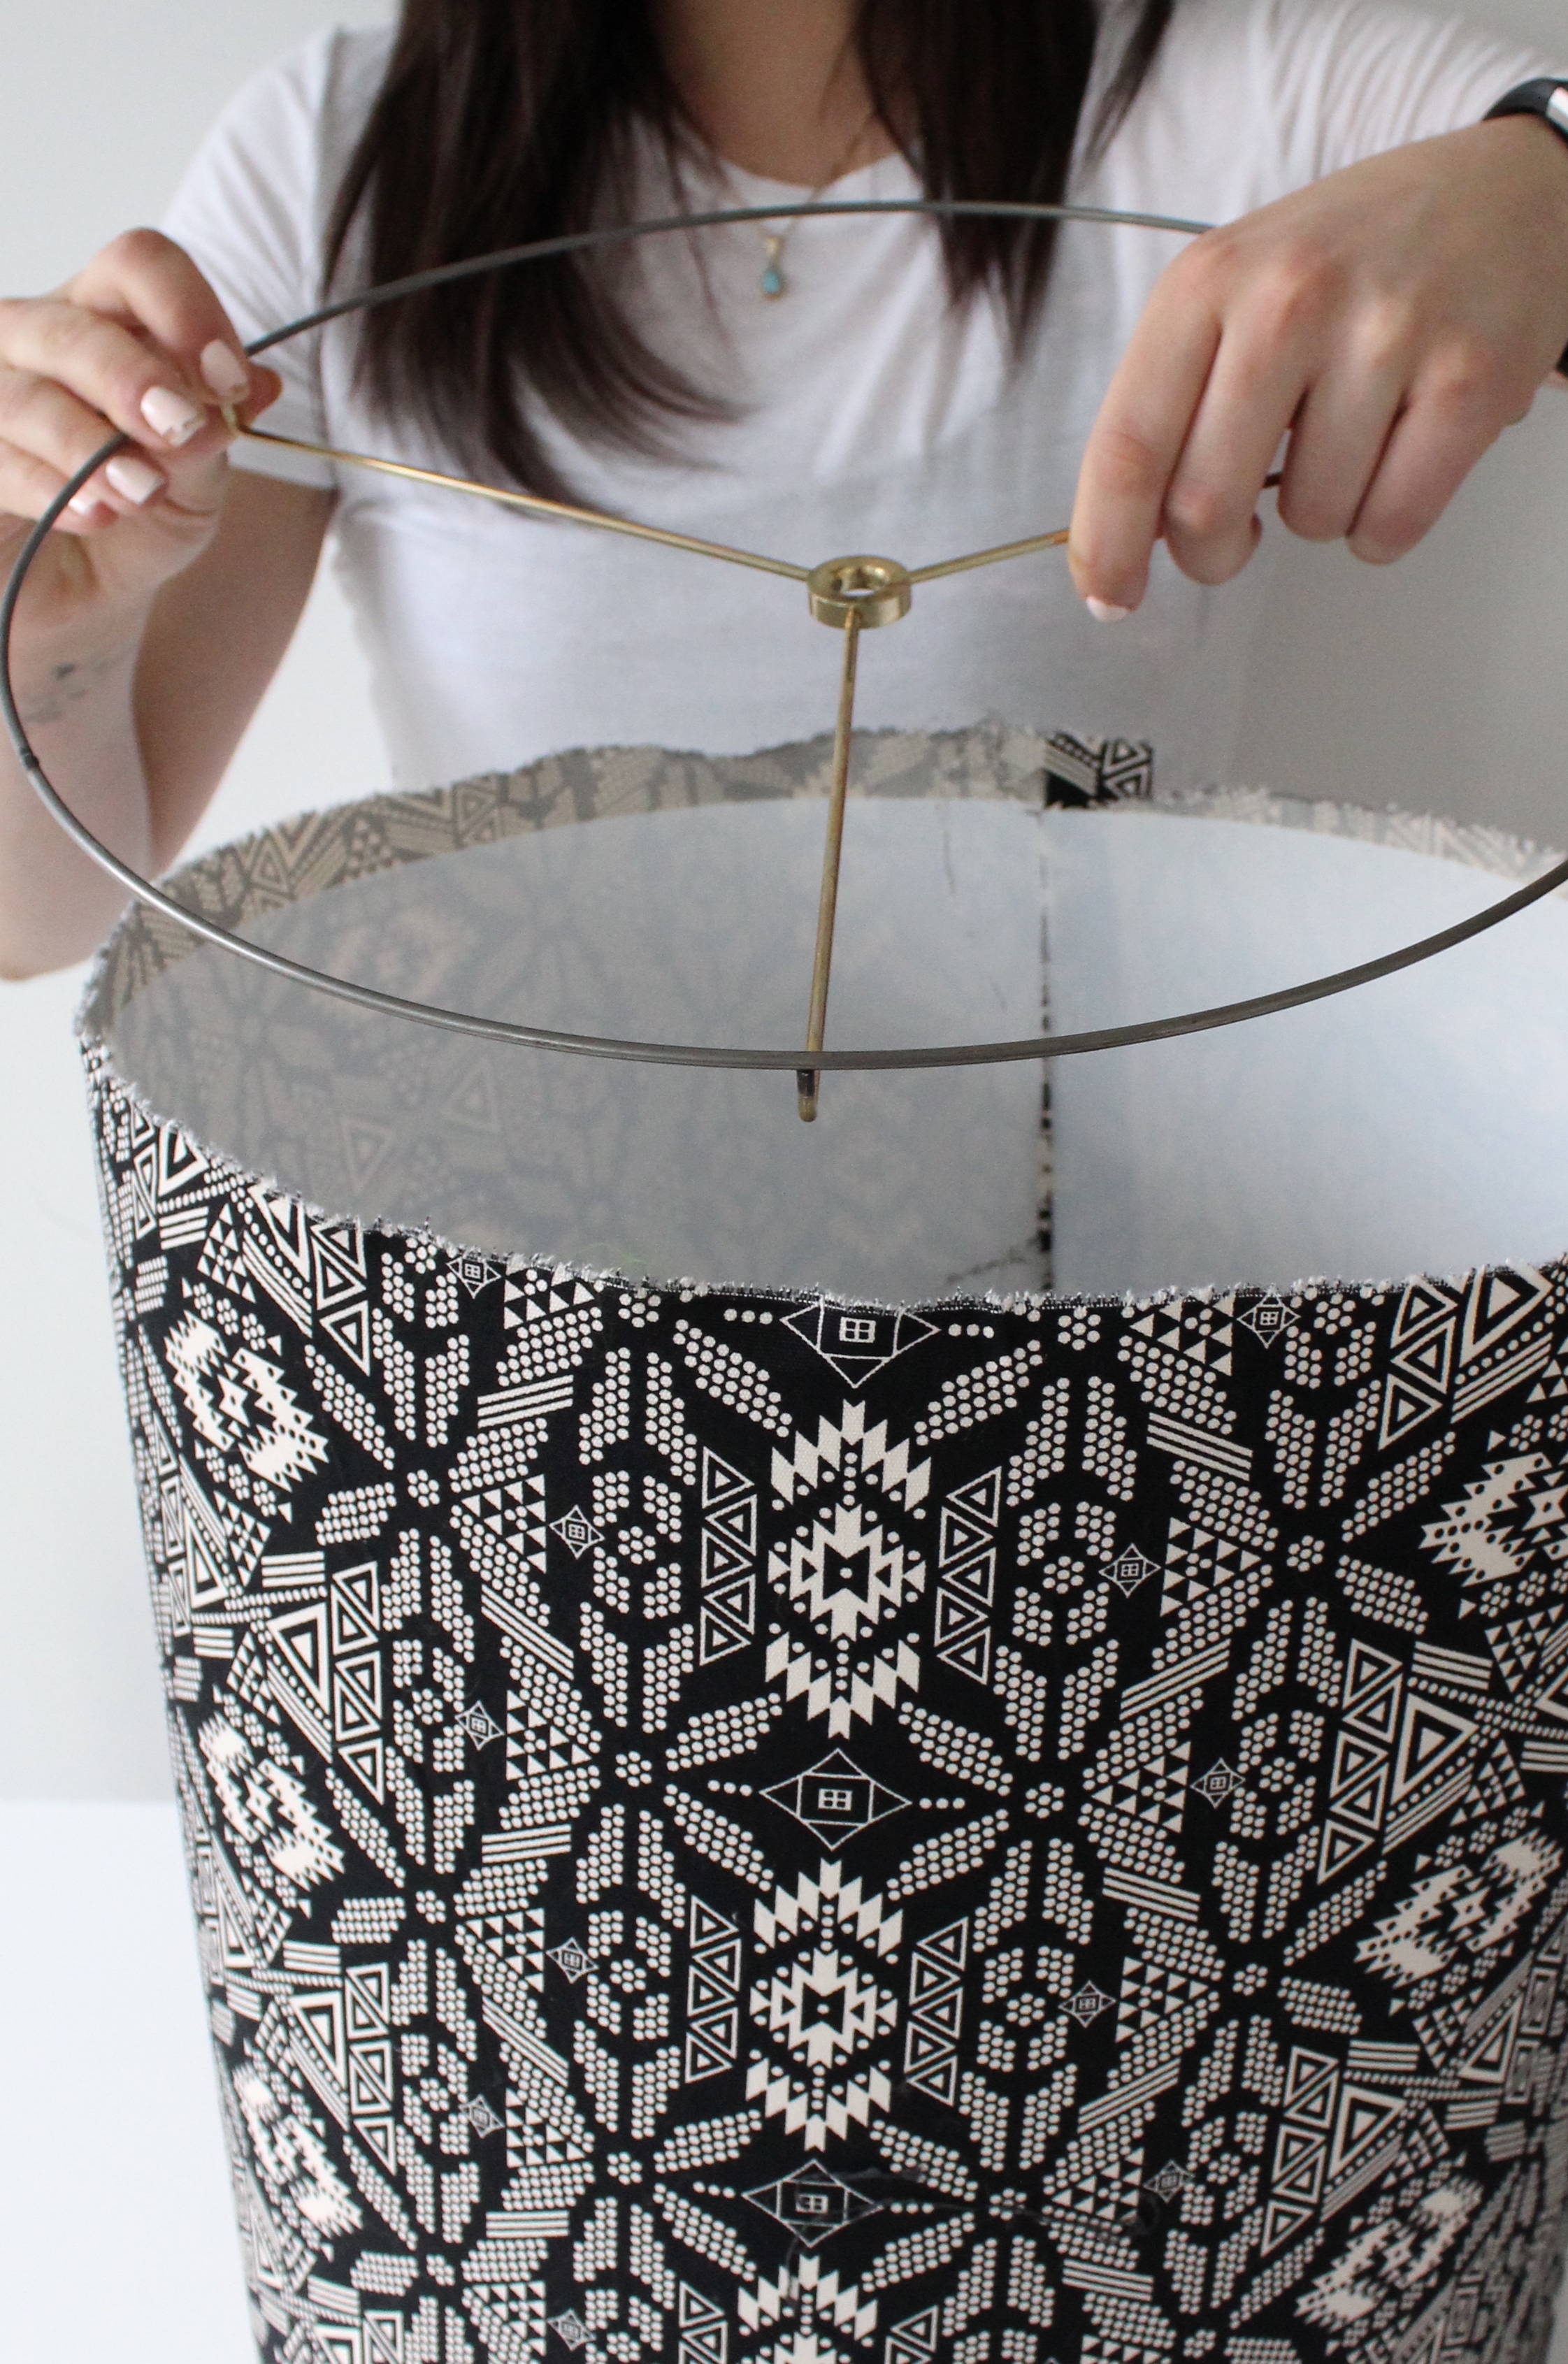 Making a DIY lampshade from scratch may seem like a daunting prospect, but with an easy to follow lampshade tutorial, you'll see that it's easy as pie! #diylampshade #lampshade #diyhomedeocr